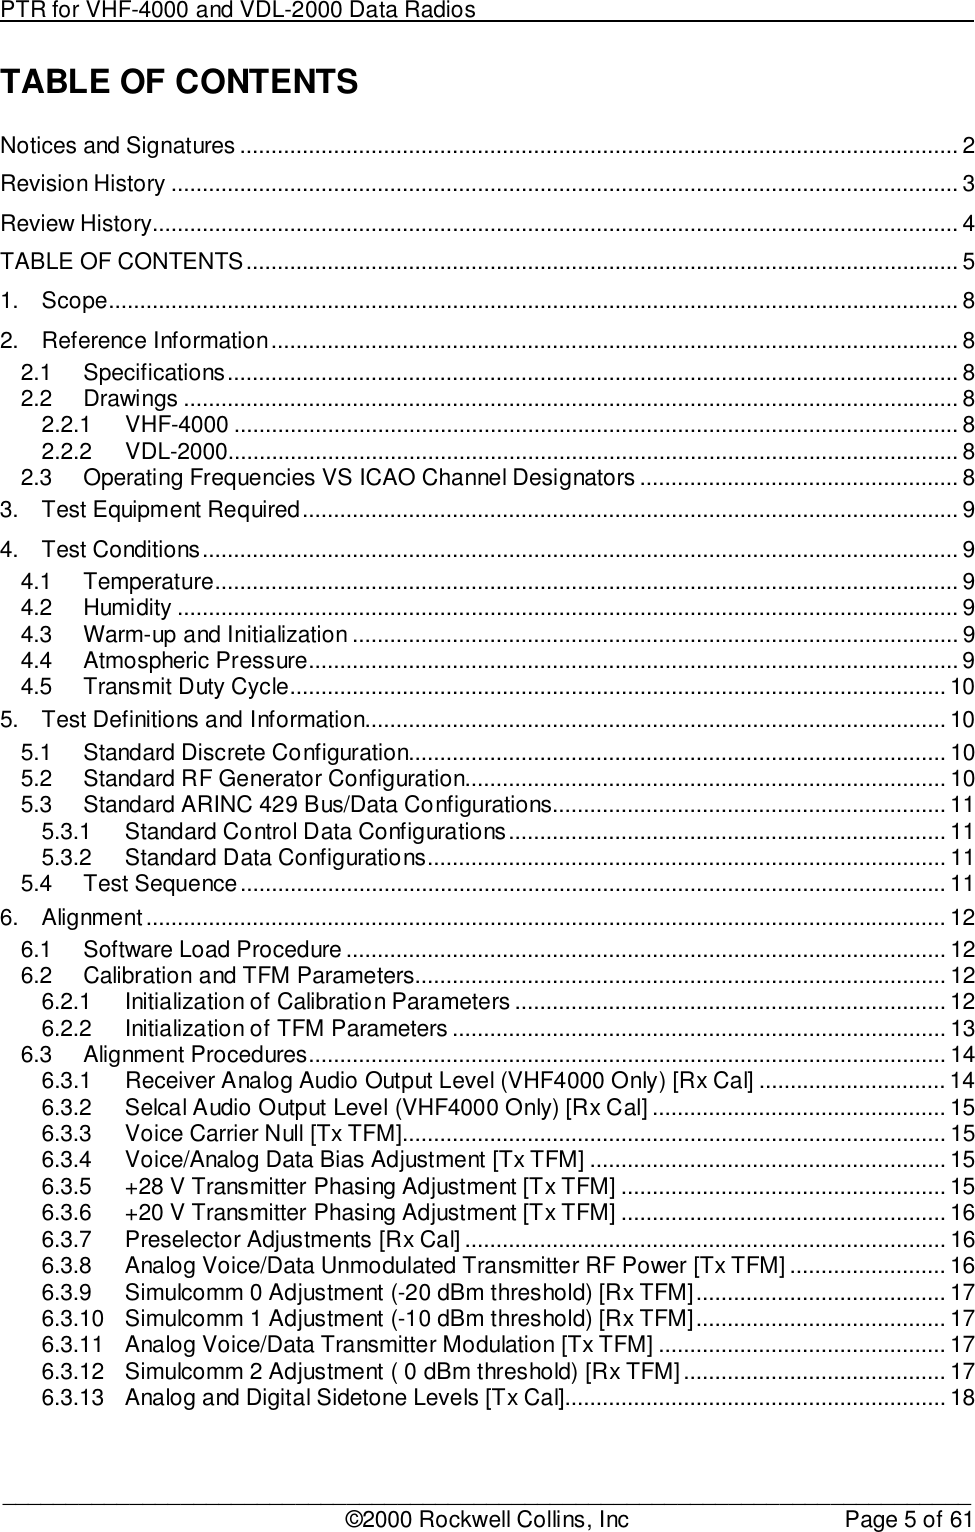 PTR for VHF-4000 and VDL-2000 Data Radios                                                                                ____________________________________________________________________________©2000 Rockwell Collins, Inc Page 5 of 61TABLE OF CONTENTSNotices and Signatures ................................................................................................................... 2Revision History .............................................................................................................................. 3Review History................................................................................................................................. 4TABLE OF CONTENTS.................................................................................................................. 51. Scope........................................................................................................................................ 82. Reference Information.............................................................................................................. 82.1 Specifications..................................................................................................................... 82.2 Drawings ............................................................................................................................ 82.2.1 VHF-4000 .................................................................................................................... 82.2.2 VDL-2000..................................................................................................................... 82.3 Operating Frequencies VS ICAO Channel Designators ................................................... 83. Test Equipment Required......................................................................................................... 94. Test Conditions......................................................................................................................... 94.1 Temperature....................................................................................................................... 94.2 Humidity ............................................................................................................................. 94.3 Warm-up and Initialization ................................................................................................. 94.4 Atmospheric Pressure........................................................................................................ 94.5 Transmit Duty Cycle......................................................................................................... 105. Test Definitions and Information............................................................................................. 105.1 Standard Discrete Configuration...................................................................................... 105.2 Standard RF Generator Configuration............................................................................. 105.3 Standard ARINC 429 Bus/Data Configurations............................................................... 115.3.1 Standard Control Data Configurations...................................................................... 115.3.2 Standard Data Configurations................................................................................... 115.4 Test Sequence................................................................................................................. 116. Alignment................................................................................................................................ 126.1 Software Load Procedure ................................................................................................ 126.2 Calibration and TFM Parameters..................................................................................... 126.2.1 Initialization of Calibration Parameters ..................................................................... 126.2.2 Initialization of TFM Parameters ............................................................................... 136.3 Alignment Procedures...................................................................................................... 146.3.1 Receiver Analog Audio Output Level (VHF4000 Only) [Rx Cal] .............................. 146.3.2 Selcal Audio Output Level (VHF4000 Only) [Rx Cal] ............................................... 156.3.3 Voice Carrier Null [Tx TFM]....................................................................................... 156.3.4 Voice/Analog Data Bias Adjustment [Tx TFM] ......................................................... 156.3.5 +28 V Transmitter Phasing Adjustment [Tx TFM] .................................................... 156.3.6 +20 V Transmitter Phasing Adjustment [Tx TFM] .................................................... 166.3.7 Preselector Adjustments [Rx Cal] ............................................................................. 166.3.8 Analog Voice/Data Unmodulated Transmitter RF Power [Tx TFM] ......................... 166.3.9 Simulcomm 0 Adjustment (-20 dBm threshold) [Rx TFM]........................................ 176.3.10 Simulcomm 1 Adjustment (-10 dBm threshold) [Rx TFM]........................................ 176.3.11 Analog Voice/Data Transmitter Modulation [Tx TFM] .............................................. 176.3.12 Simulcomm 2 Adjustment ( 0 dBm threshold) [Rx TFM].......................................... 176.3.13 Analog and Digital Sidetone Levels [Tx Cal]............................................................. 18